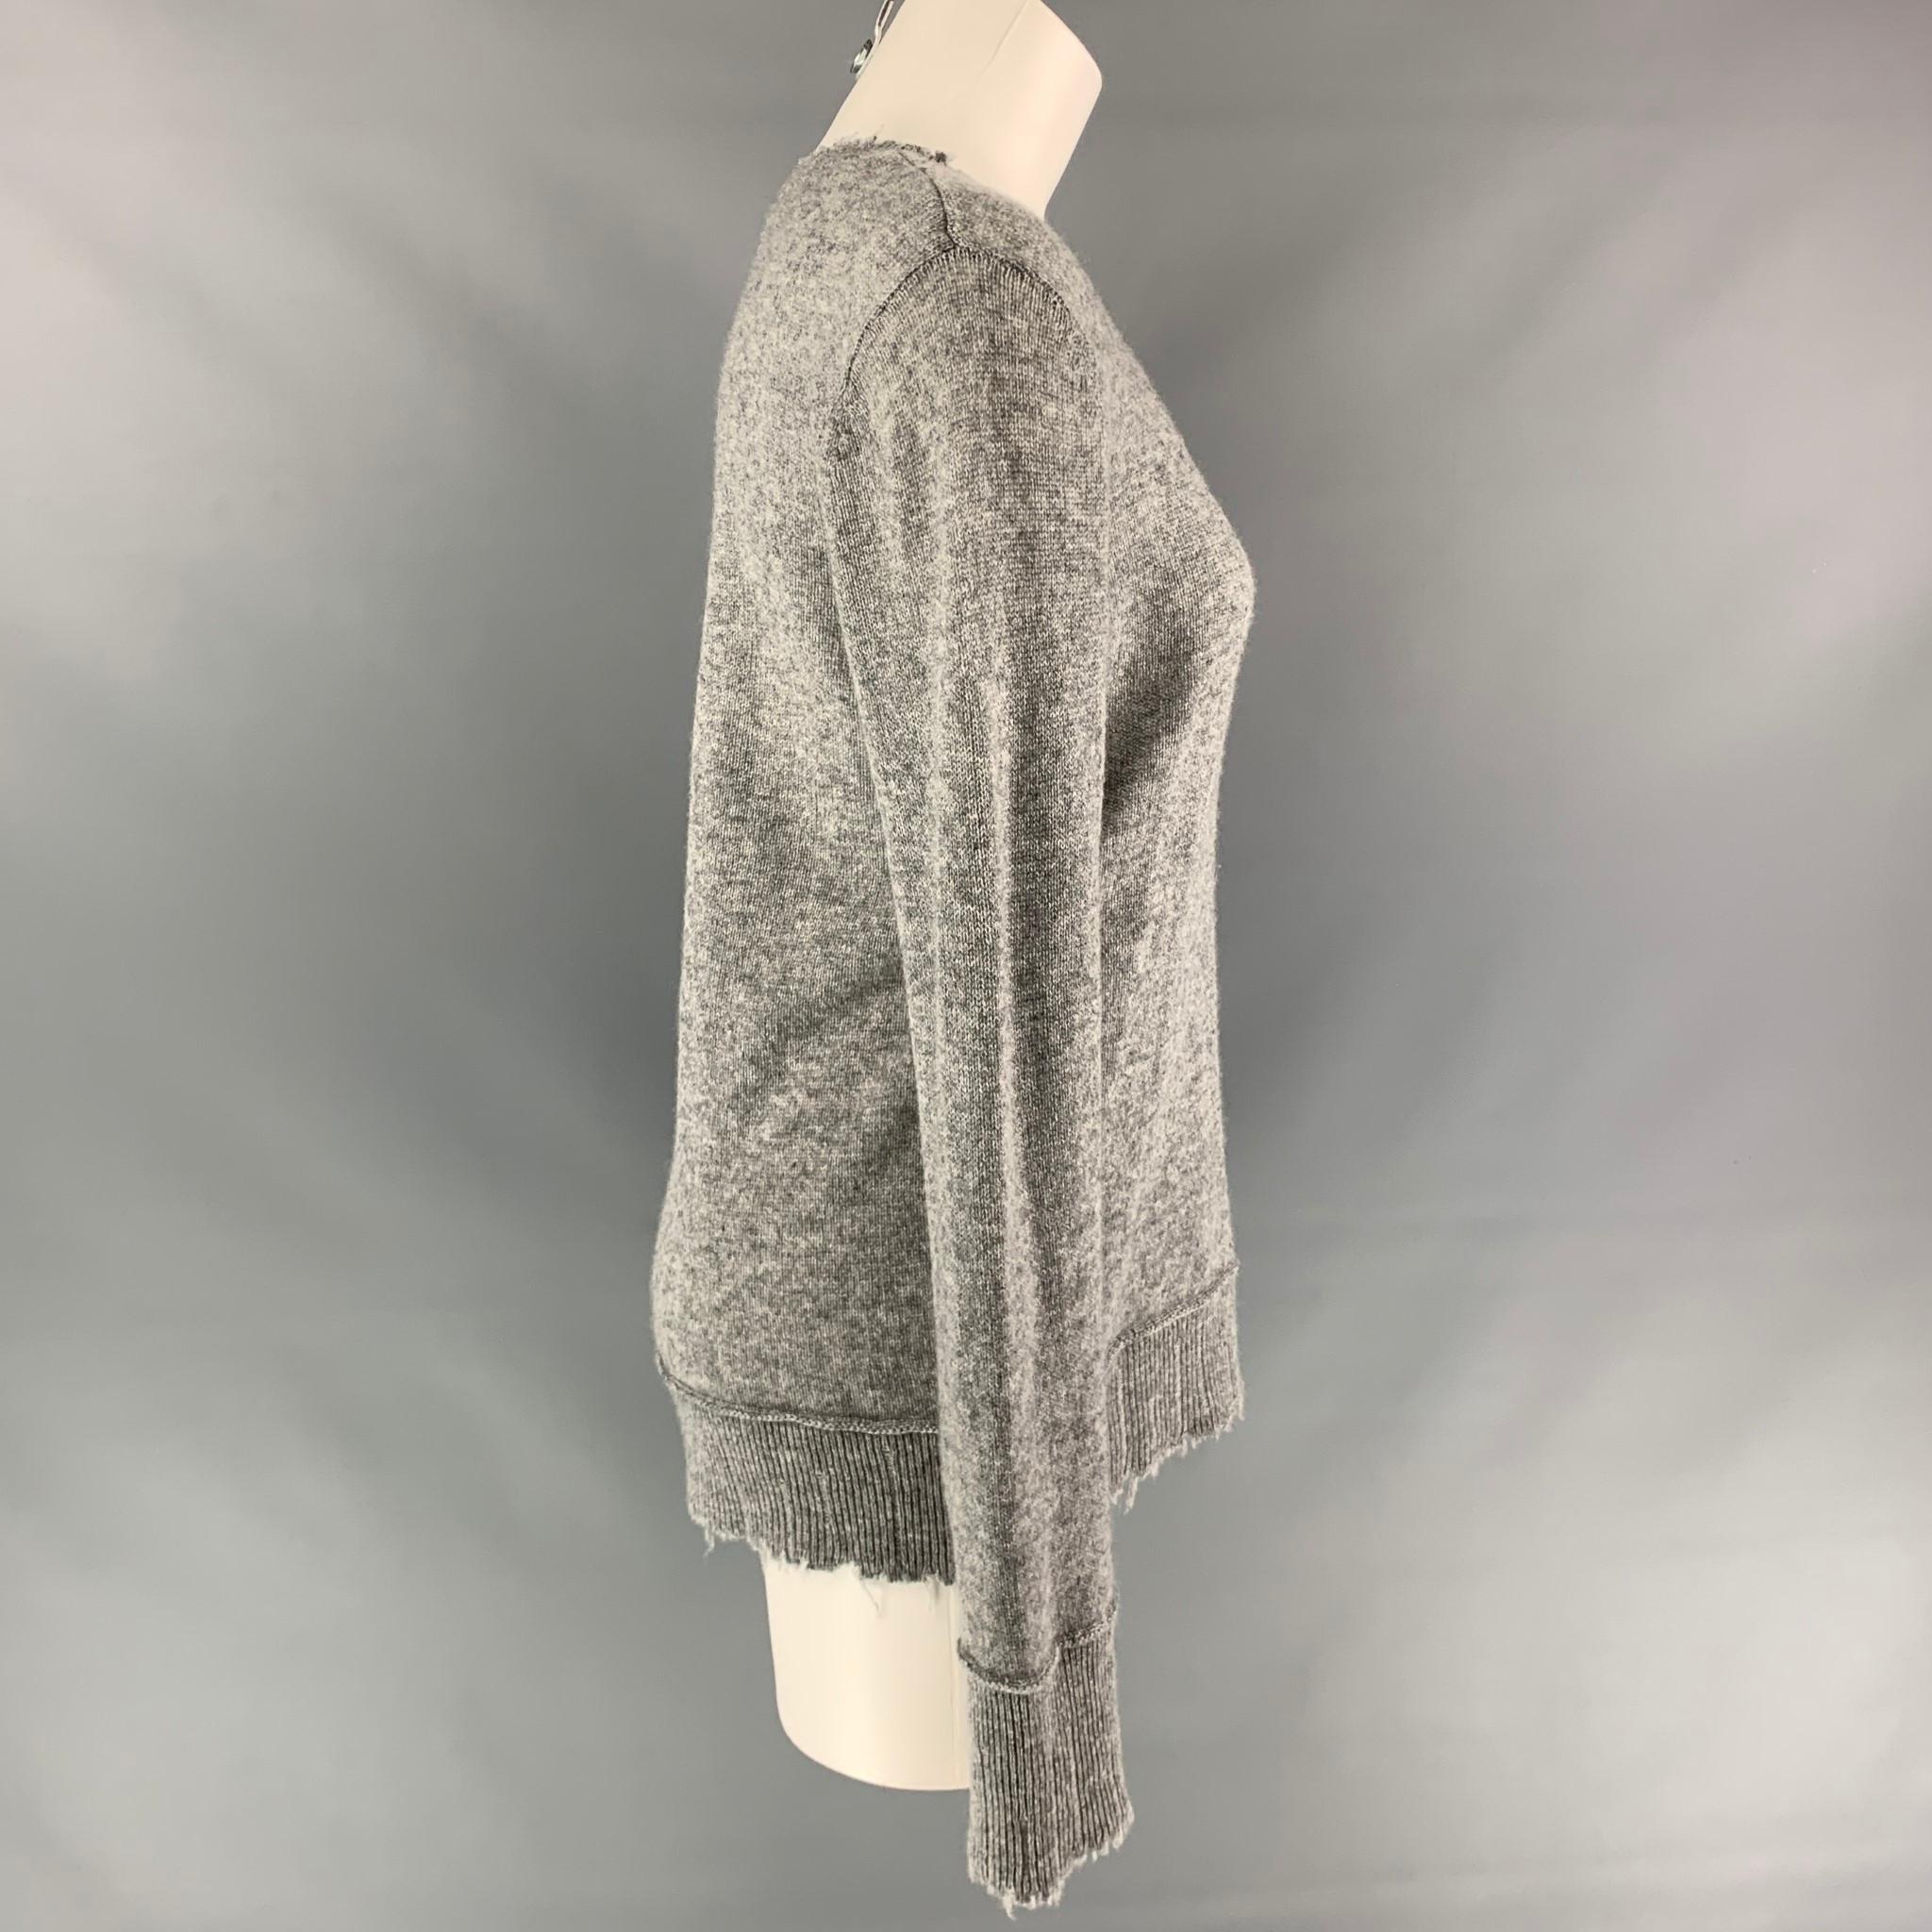 R13 sweater comes in a grey heather cashmere featuring distressed edges and a crew-neck.

Very Good Pre-Owned Condition.
Marked: S
Original Retail Price: $1,350.00

Measurements:

Shoulder: 17 in.
Bust: 40 in.
Sleeve: 28.5 in.
Length: 26 in.  